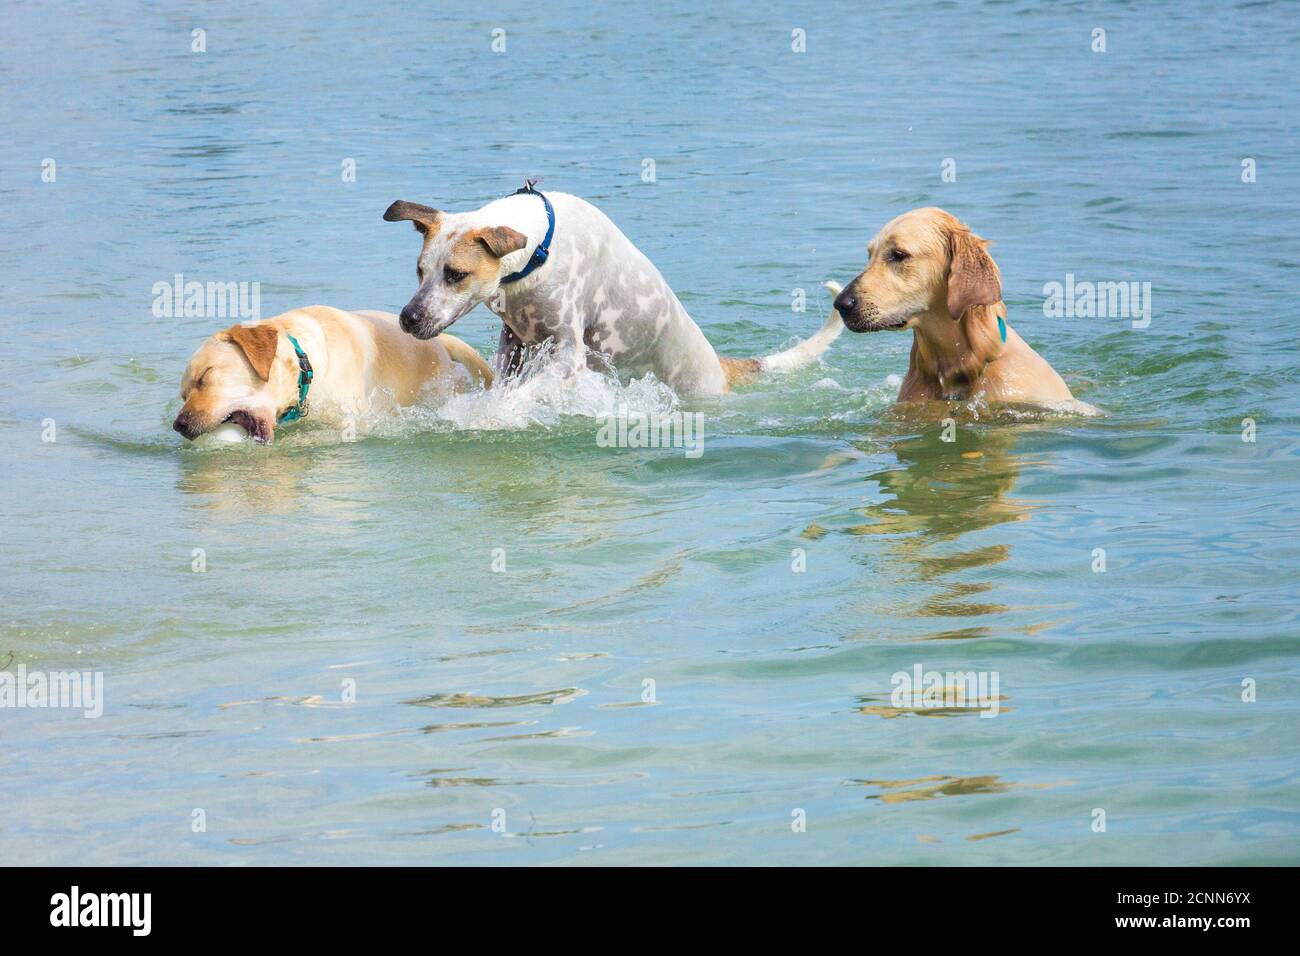 Three dogs playing with a ball in ocean, Florida, USA Stock Photo